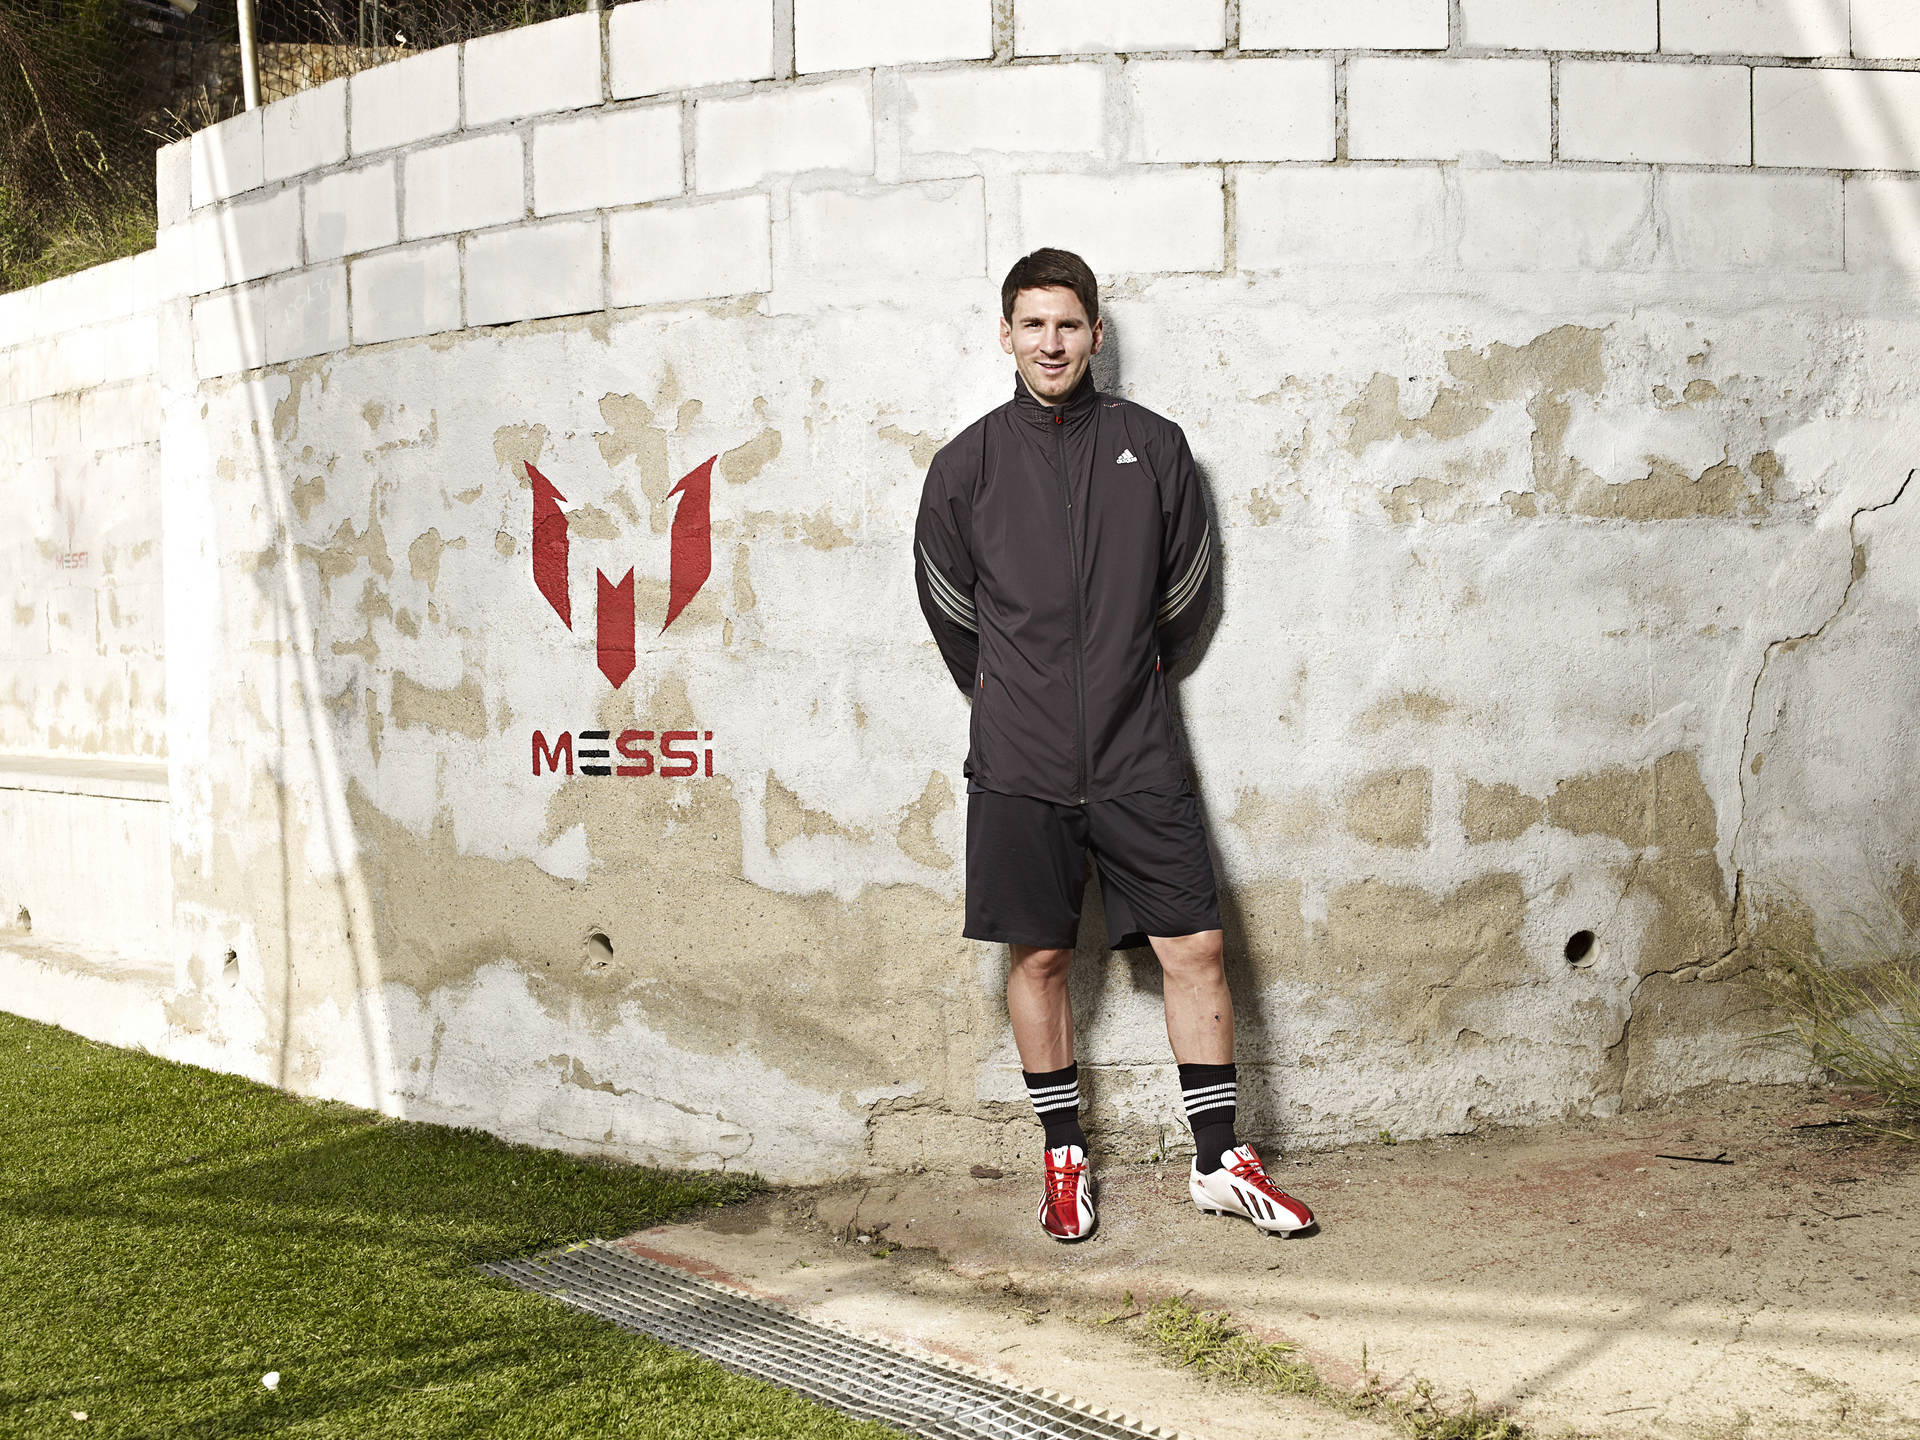 Lionel Messi With Messi Logo Background